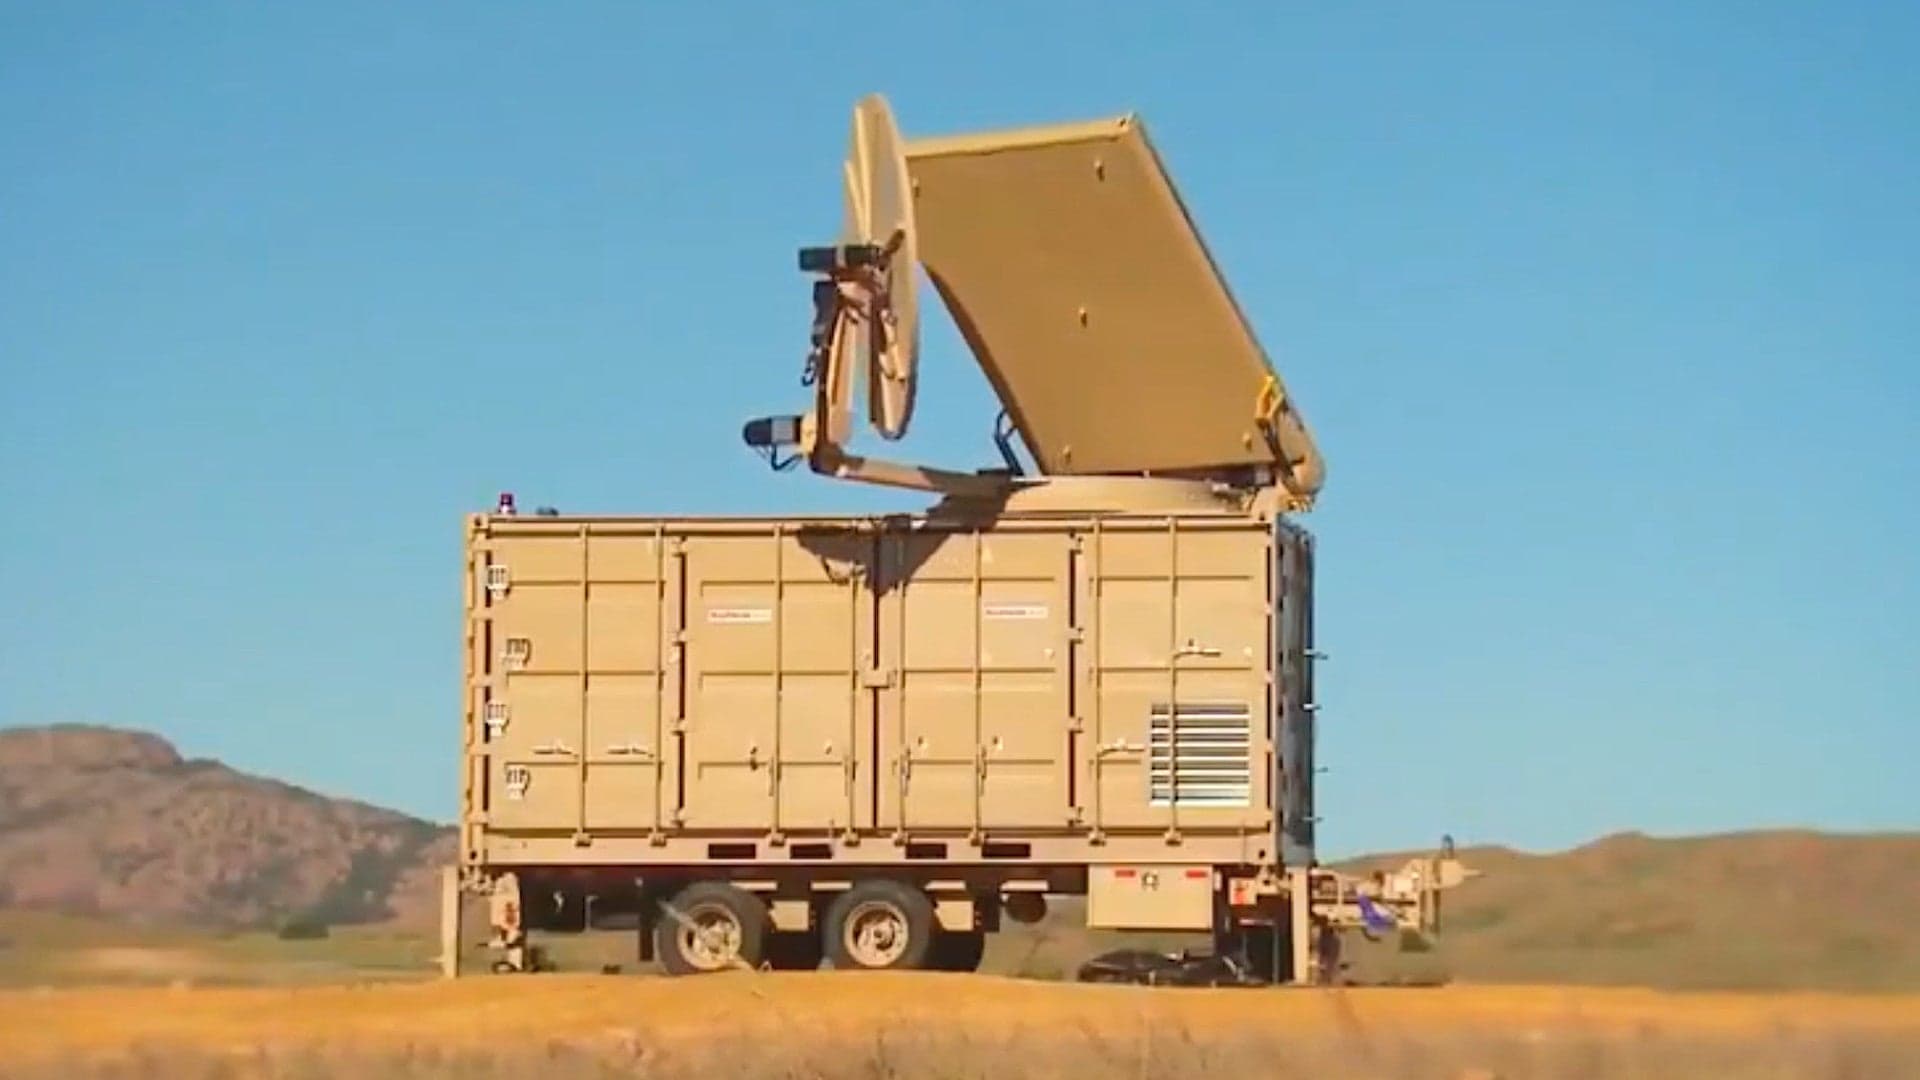 Air Force Set To Deploy Its Counter-Drone “Phaser” Microwave Weapon Overseas